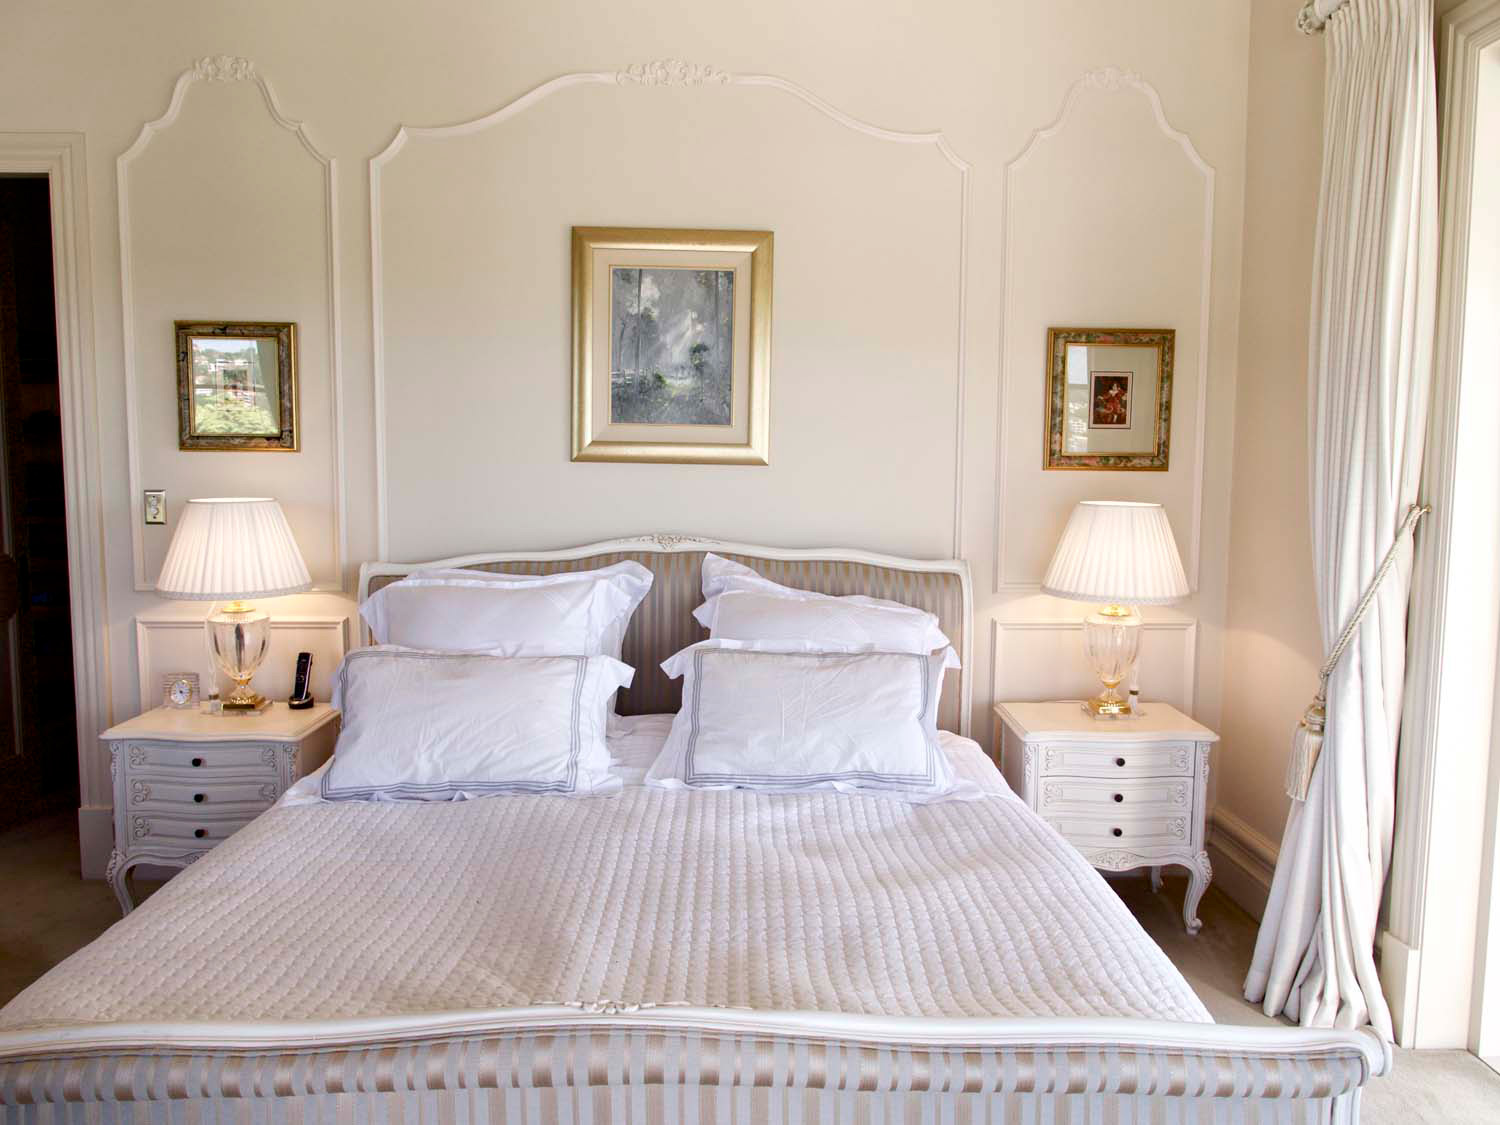 5 Bedroom with wall panelling and french bed and bedside tables and lights